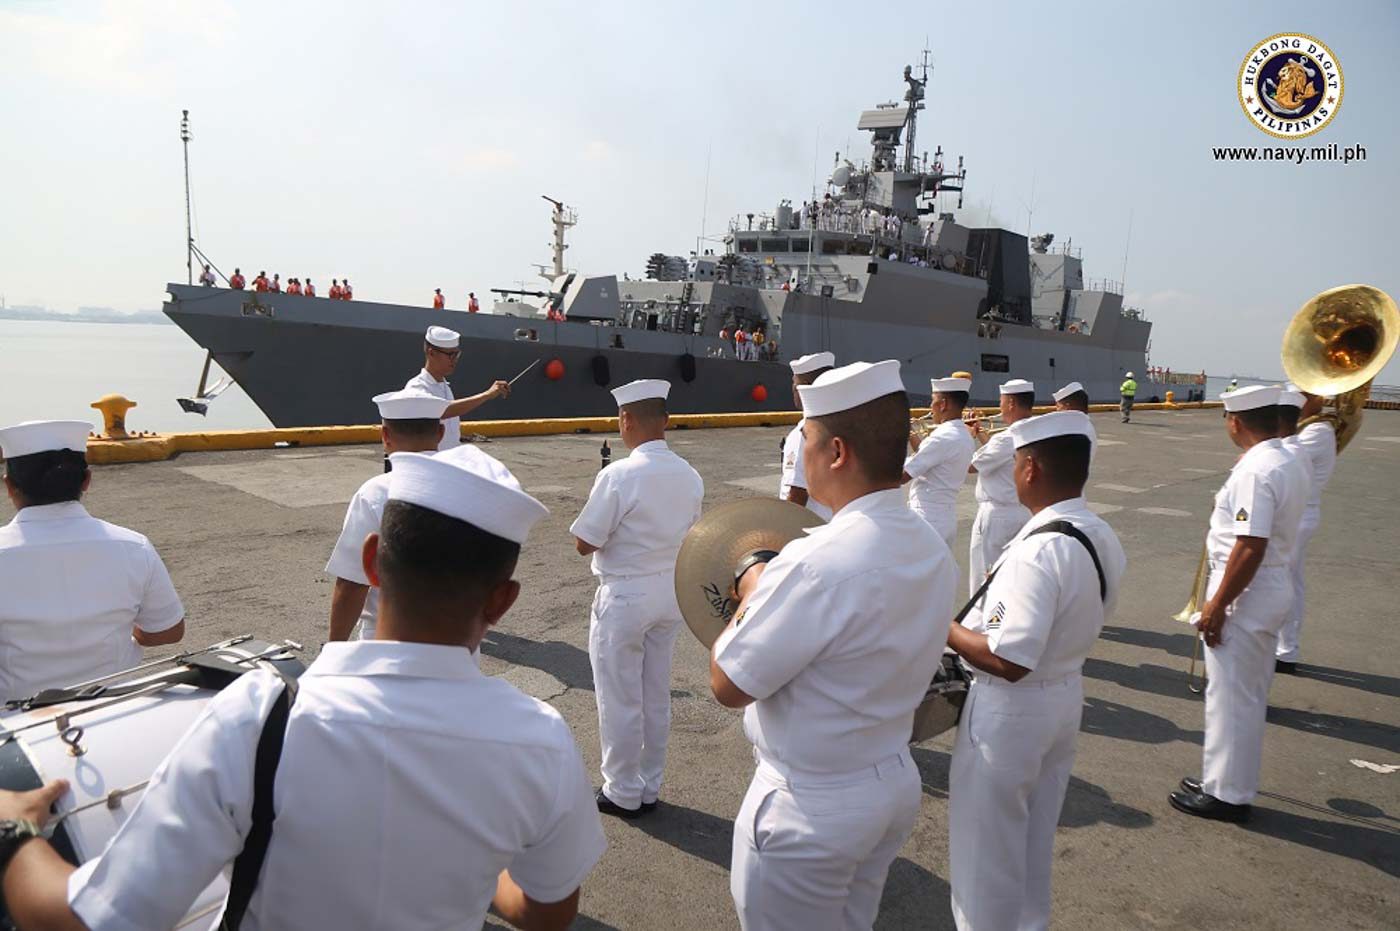 LOOK: Indian Navy ships on friendly visit to Manila